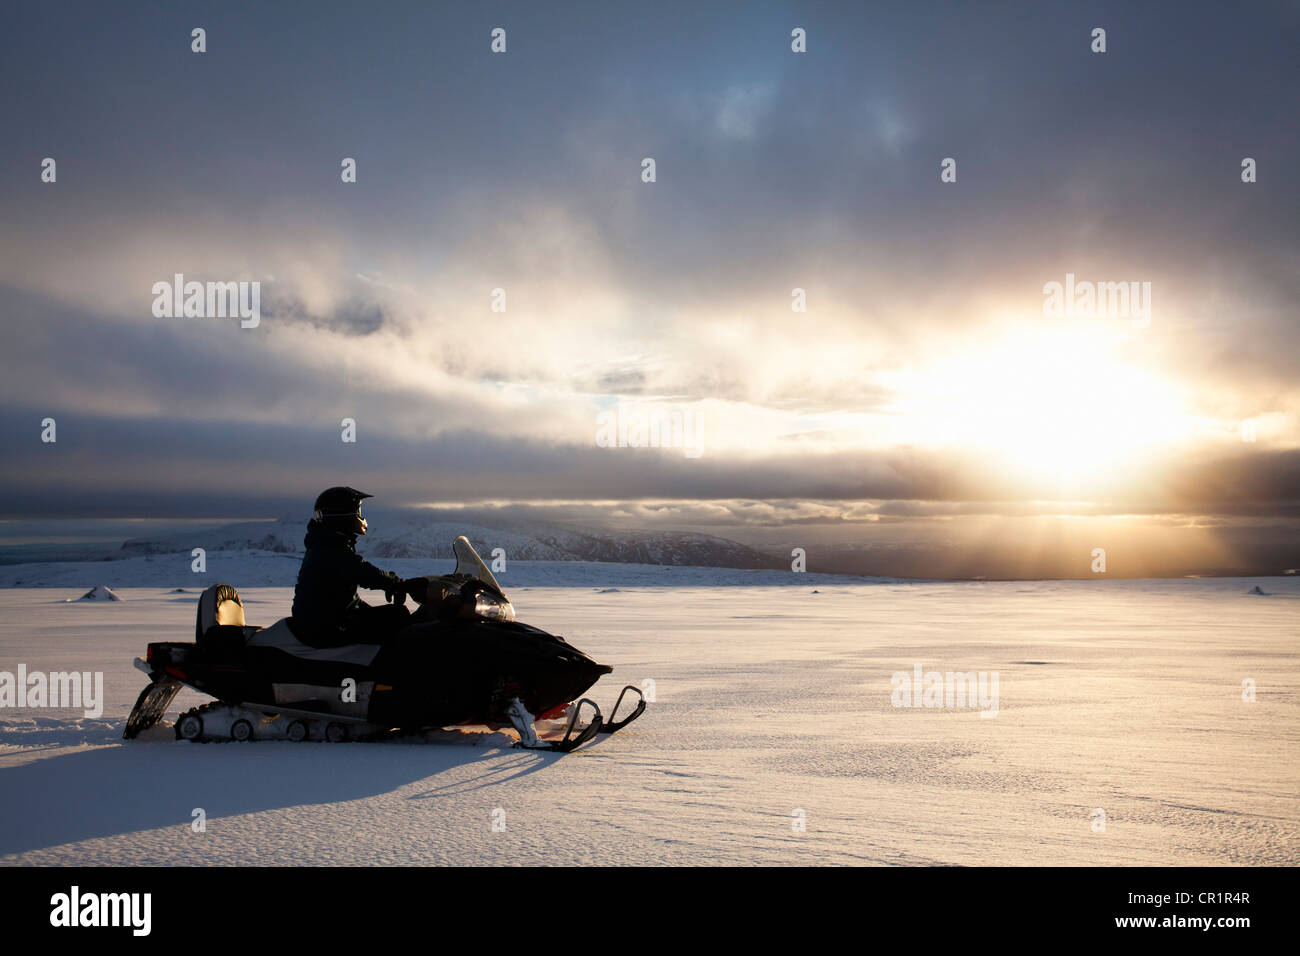 Man driving snowmobile in snowy field Stock Photo